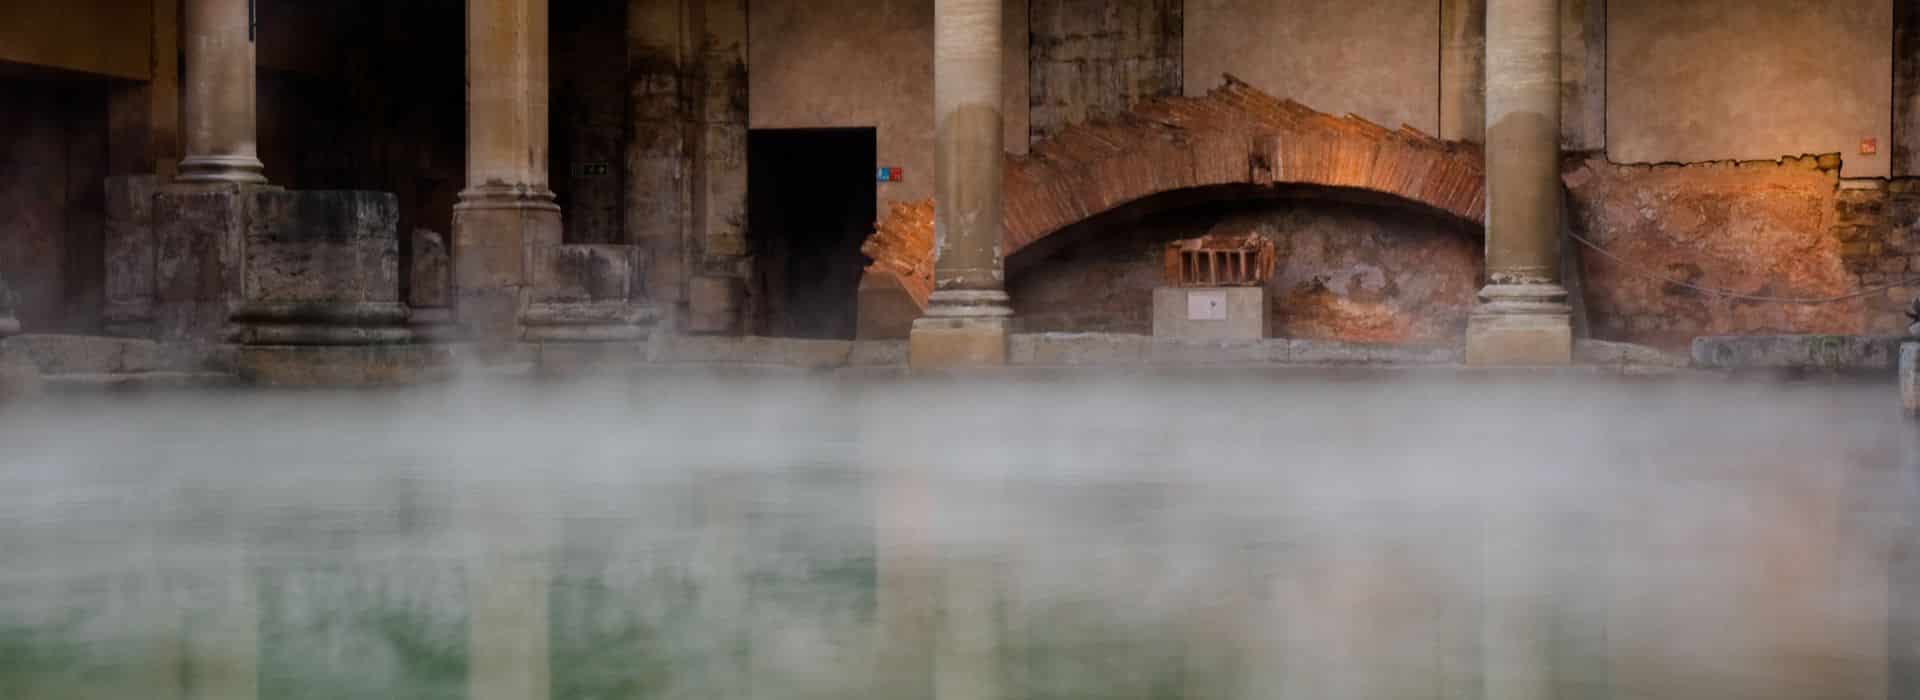 Picture of mists over Roman Baths | The Perfect Bath: Create the Ultimate Ritual Bathing Experience | Shine Body & Bath Blog